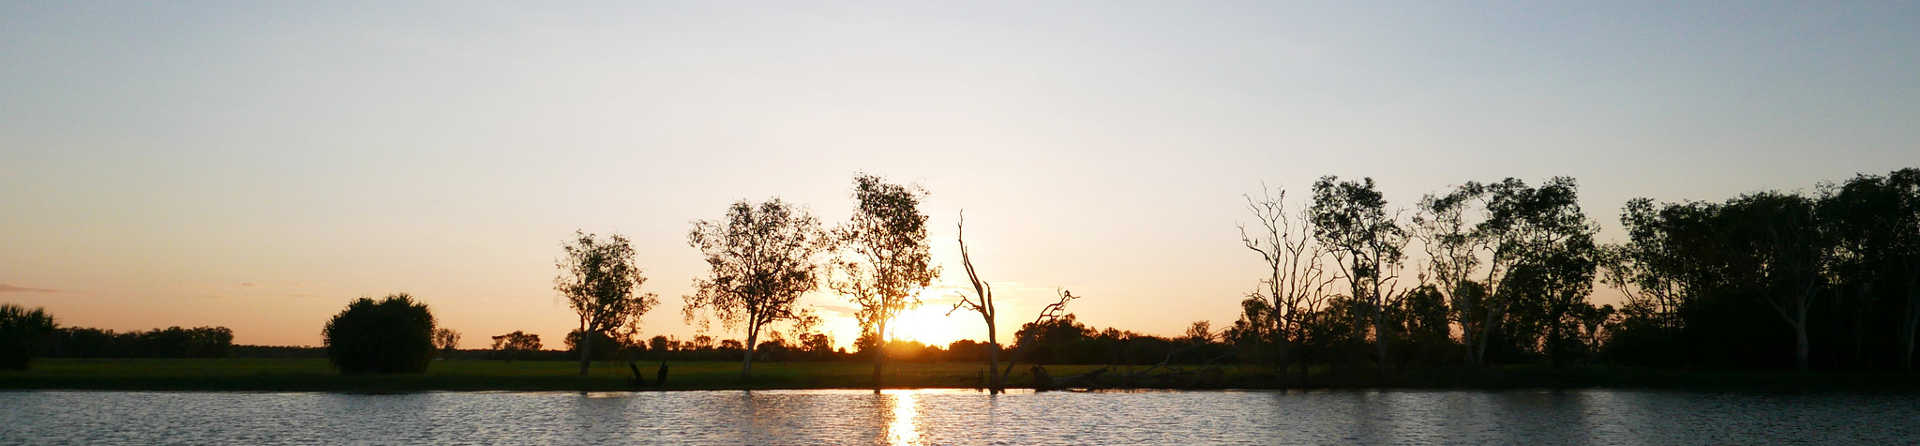 What is the best way to see Kakadu?